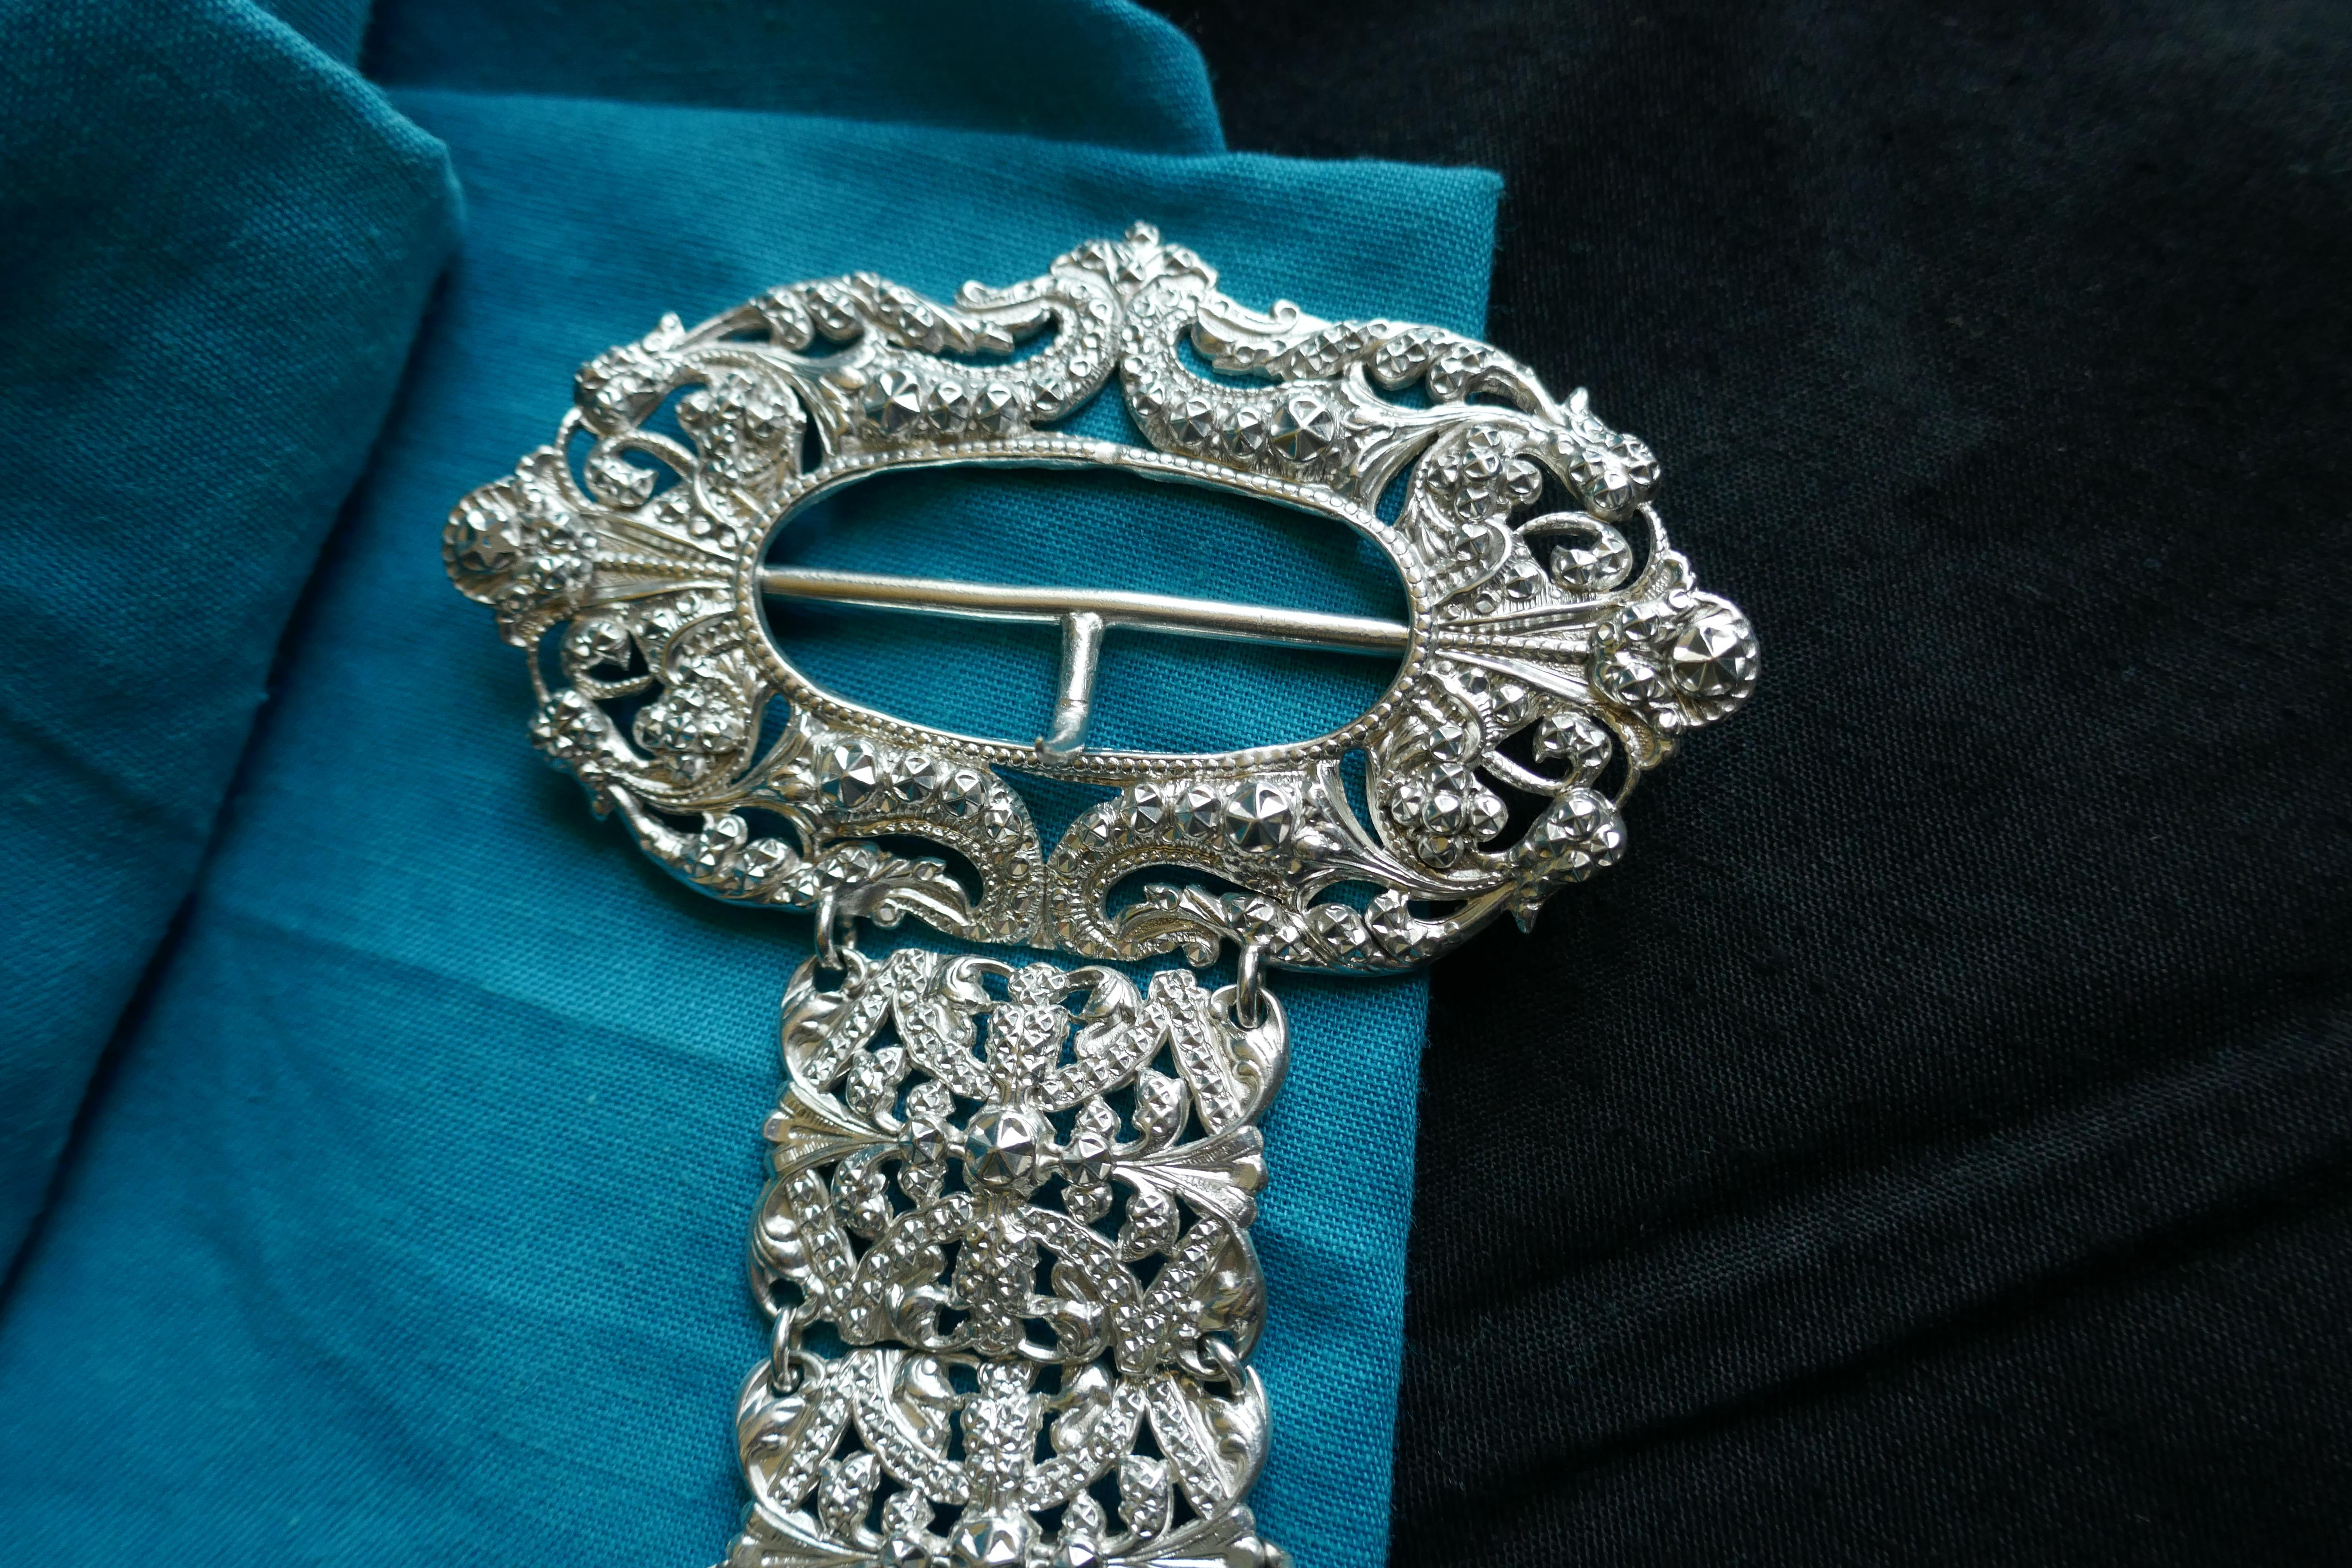 French Arts and Crafts Silver Belt, Articulated Links with Chatelaine Ring

This is a stunning, piece, the belt is composed of 27, 3.5cm x 2.5cm repousse links joined to an Oval Buckle with a central vertical bar. The detail is exquisite, 7 of the